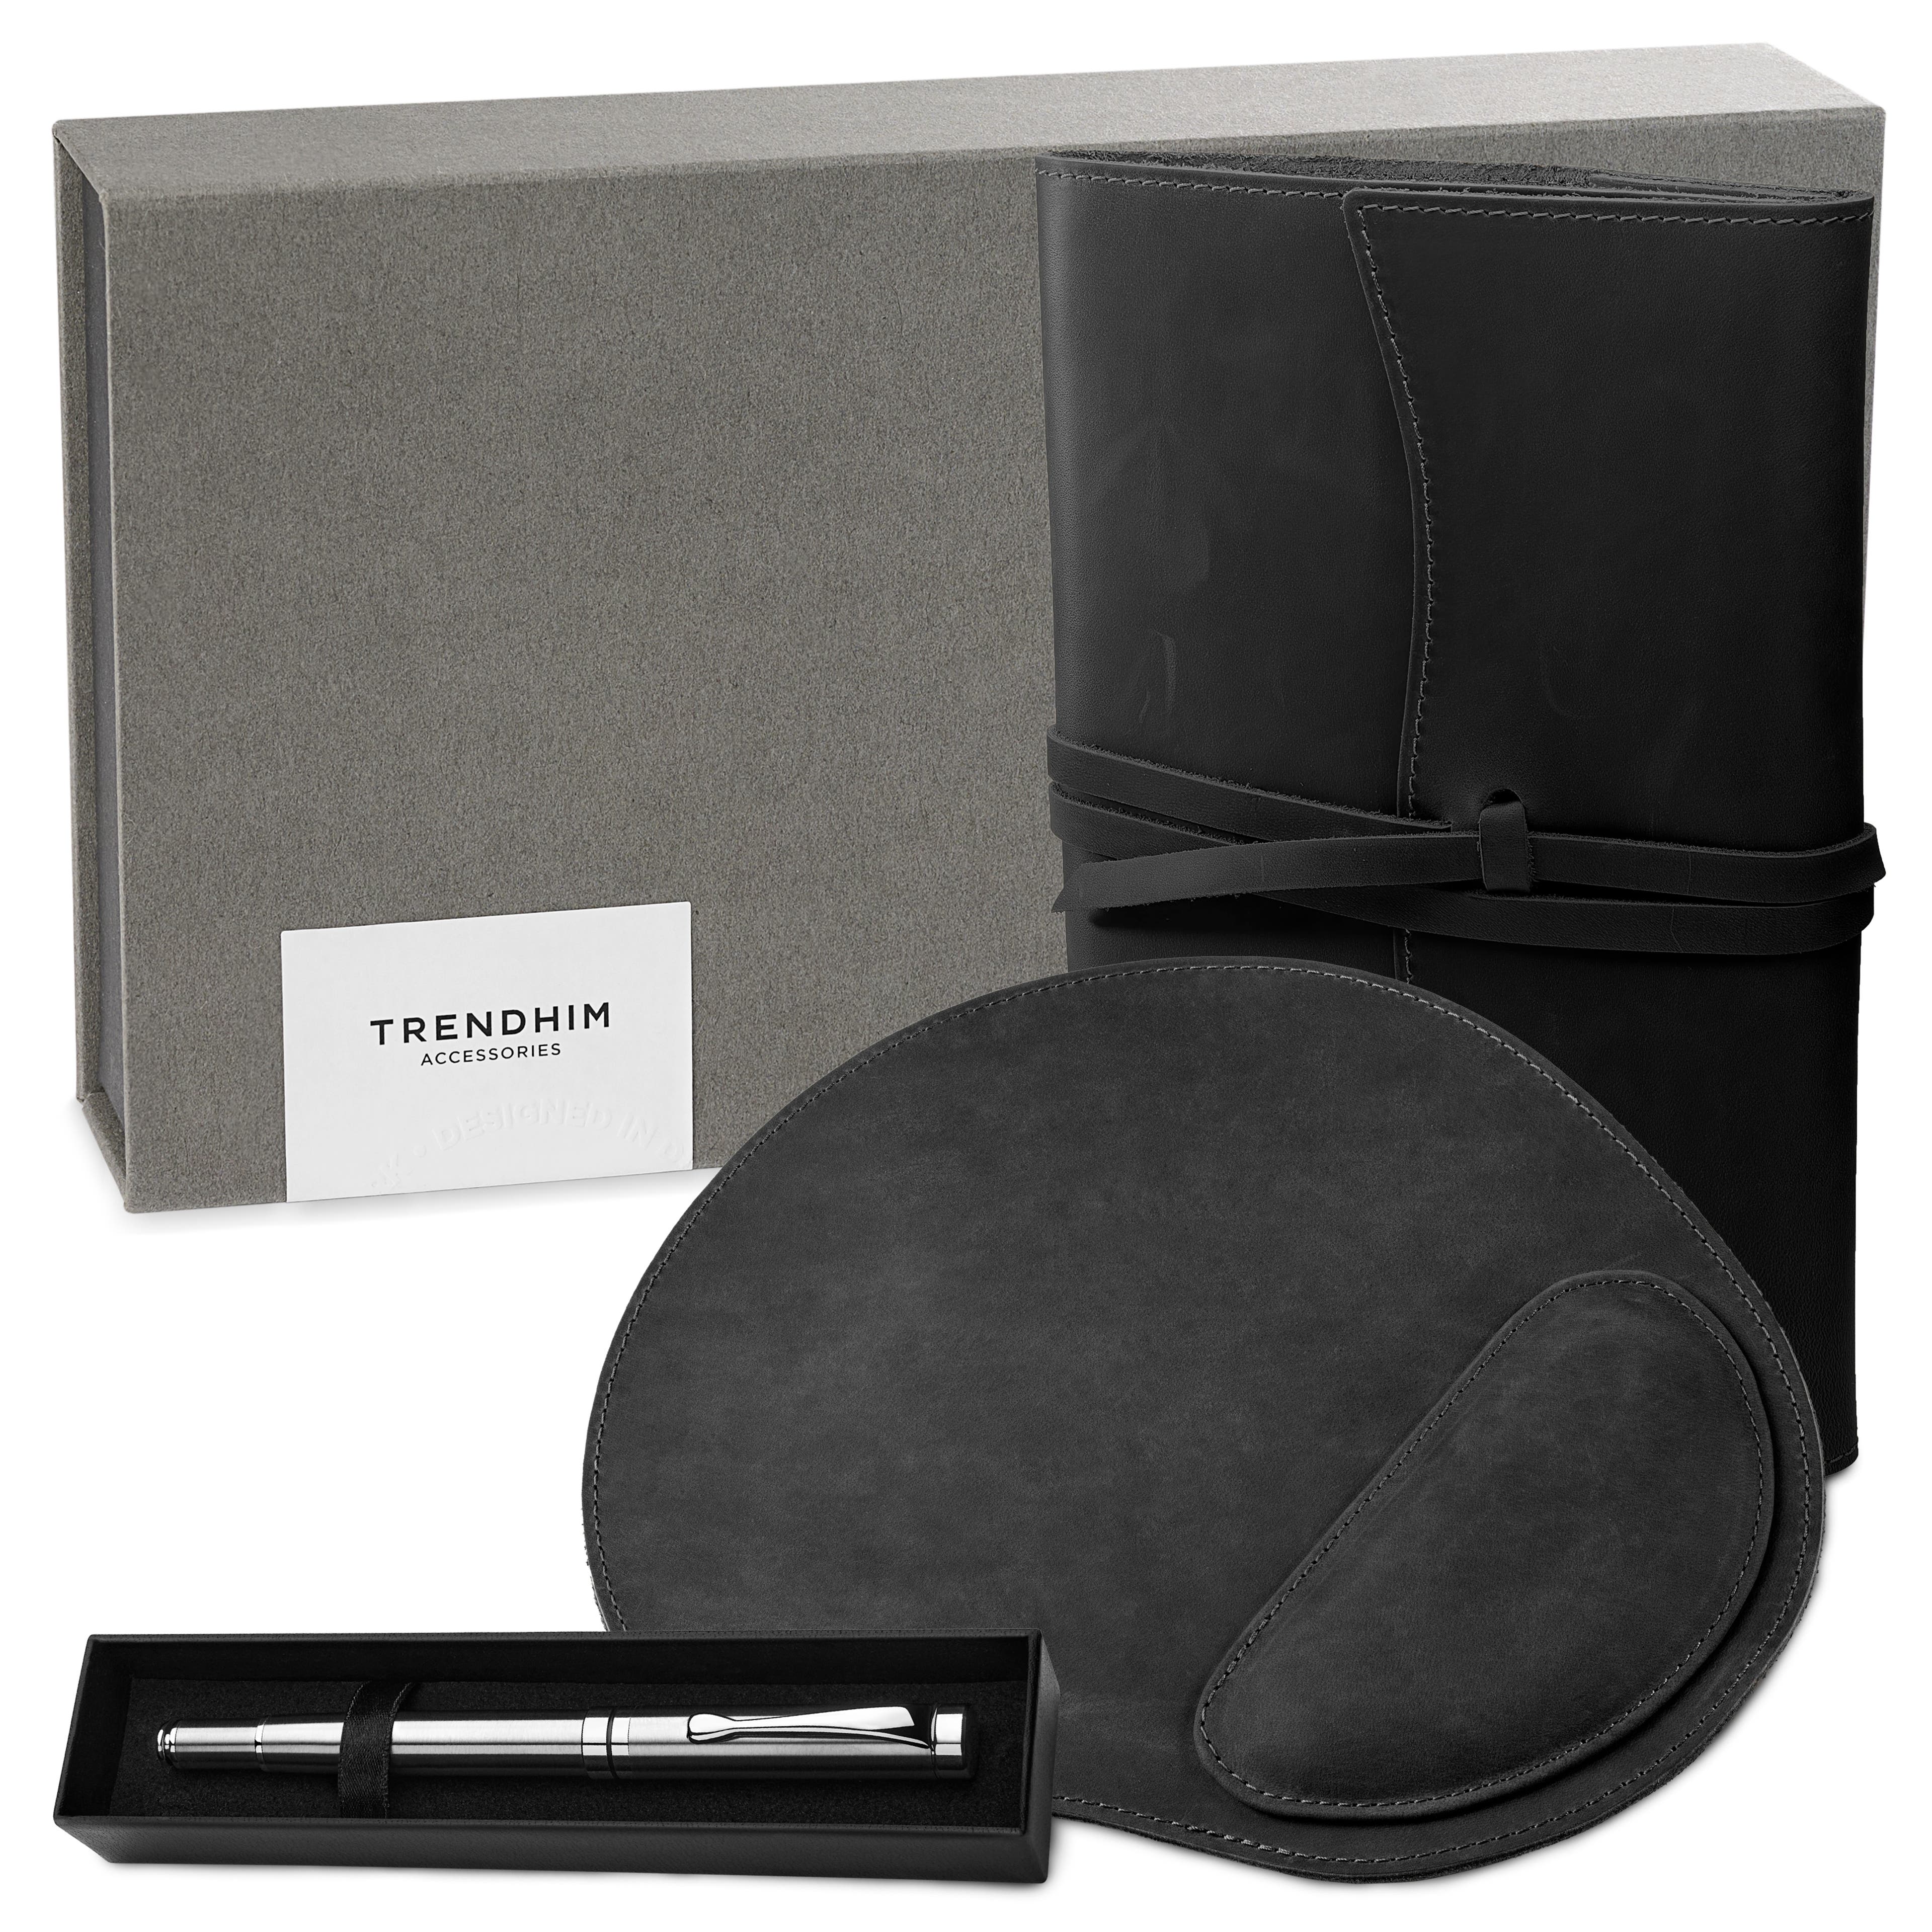 Professional Office Writing Gift Box | Black Leather